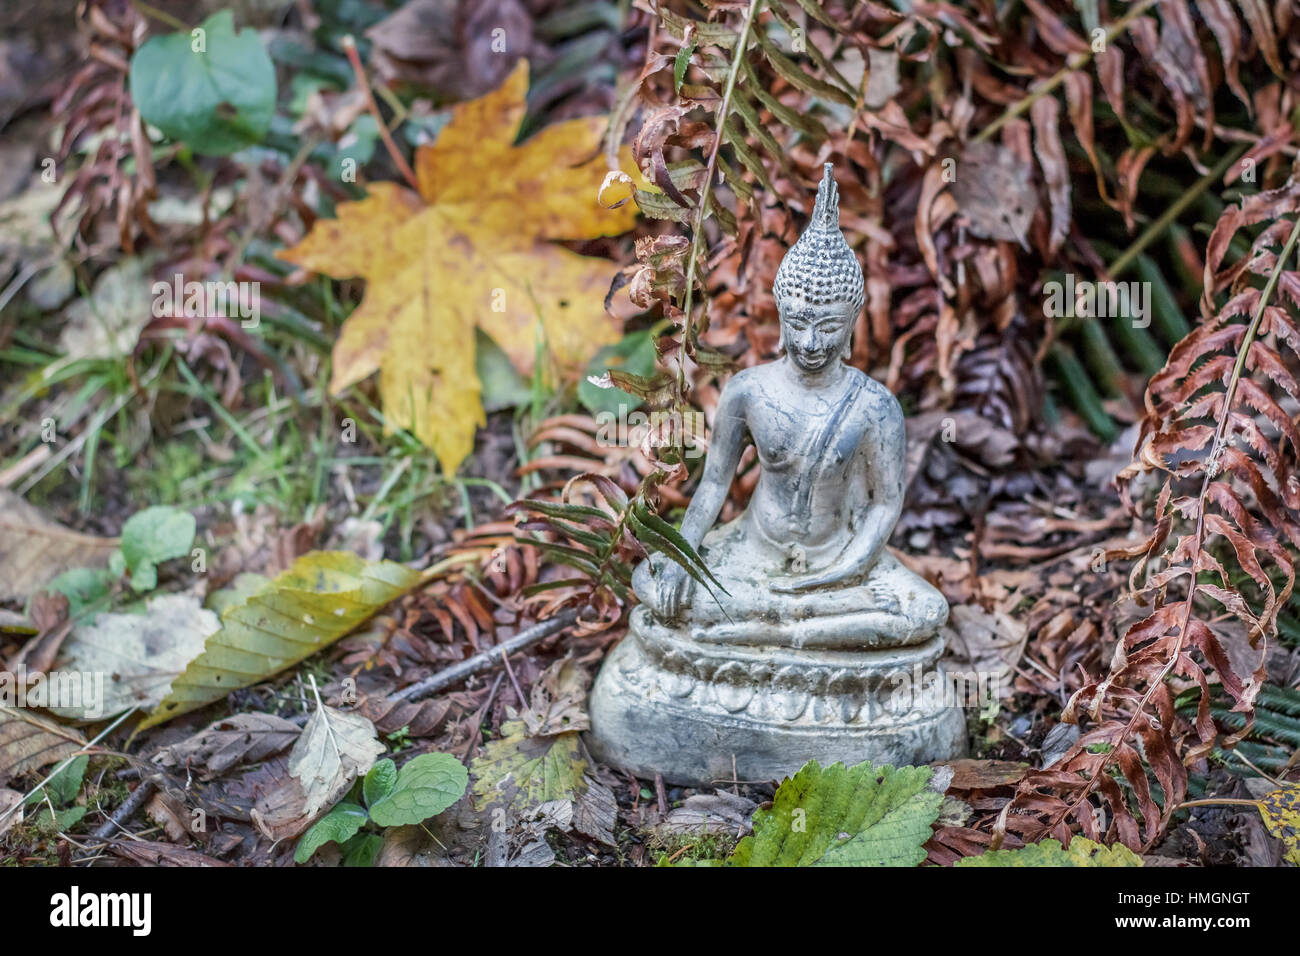 A statue of Buddha sits in a garden in autumn, surrounded by fallen leaves and dried fern fronds. Stock Photo